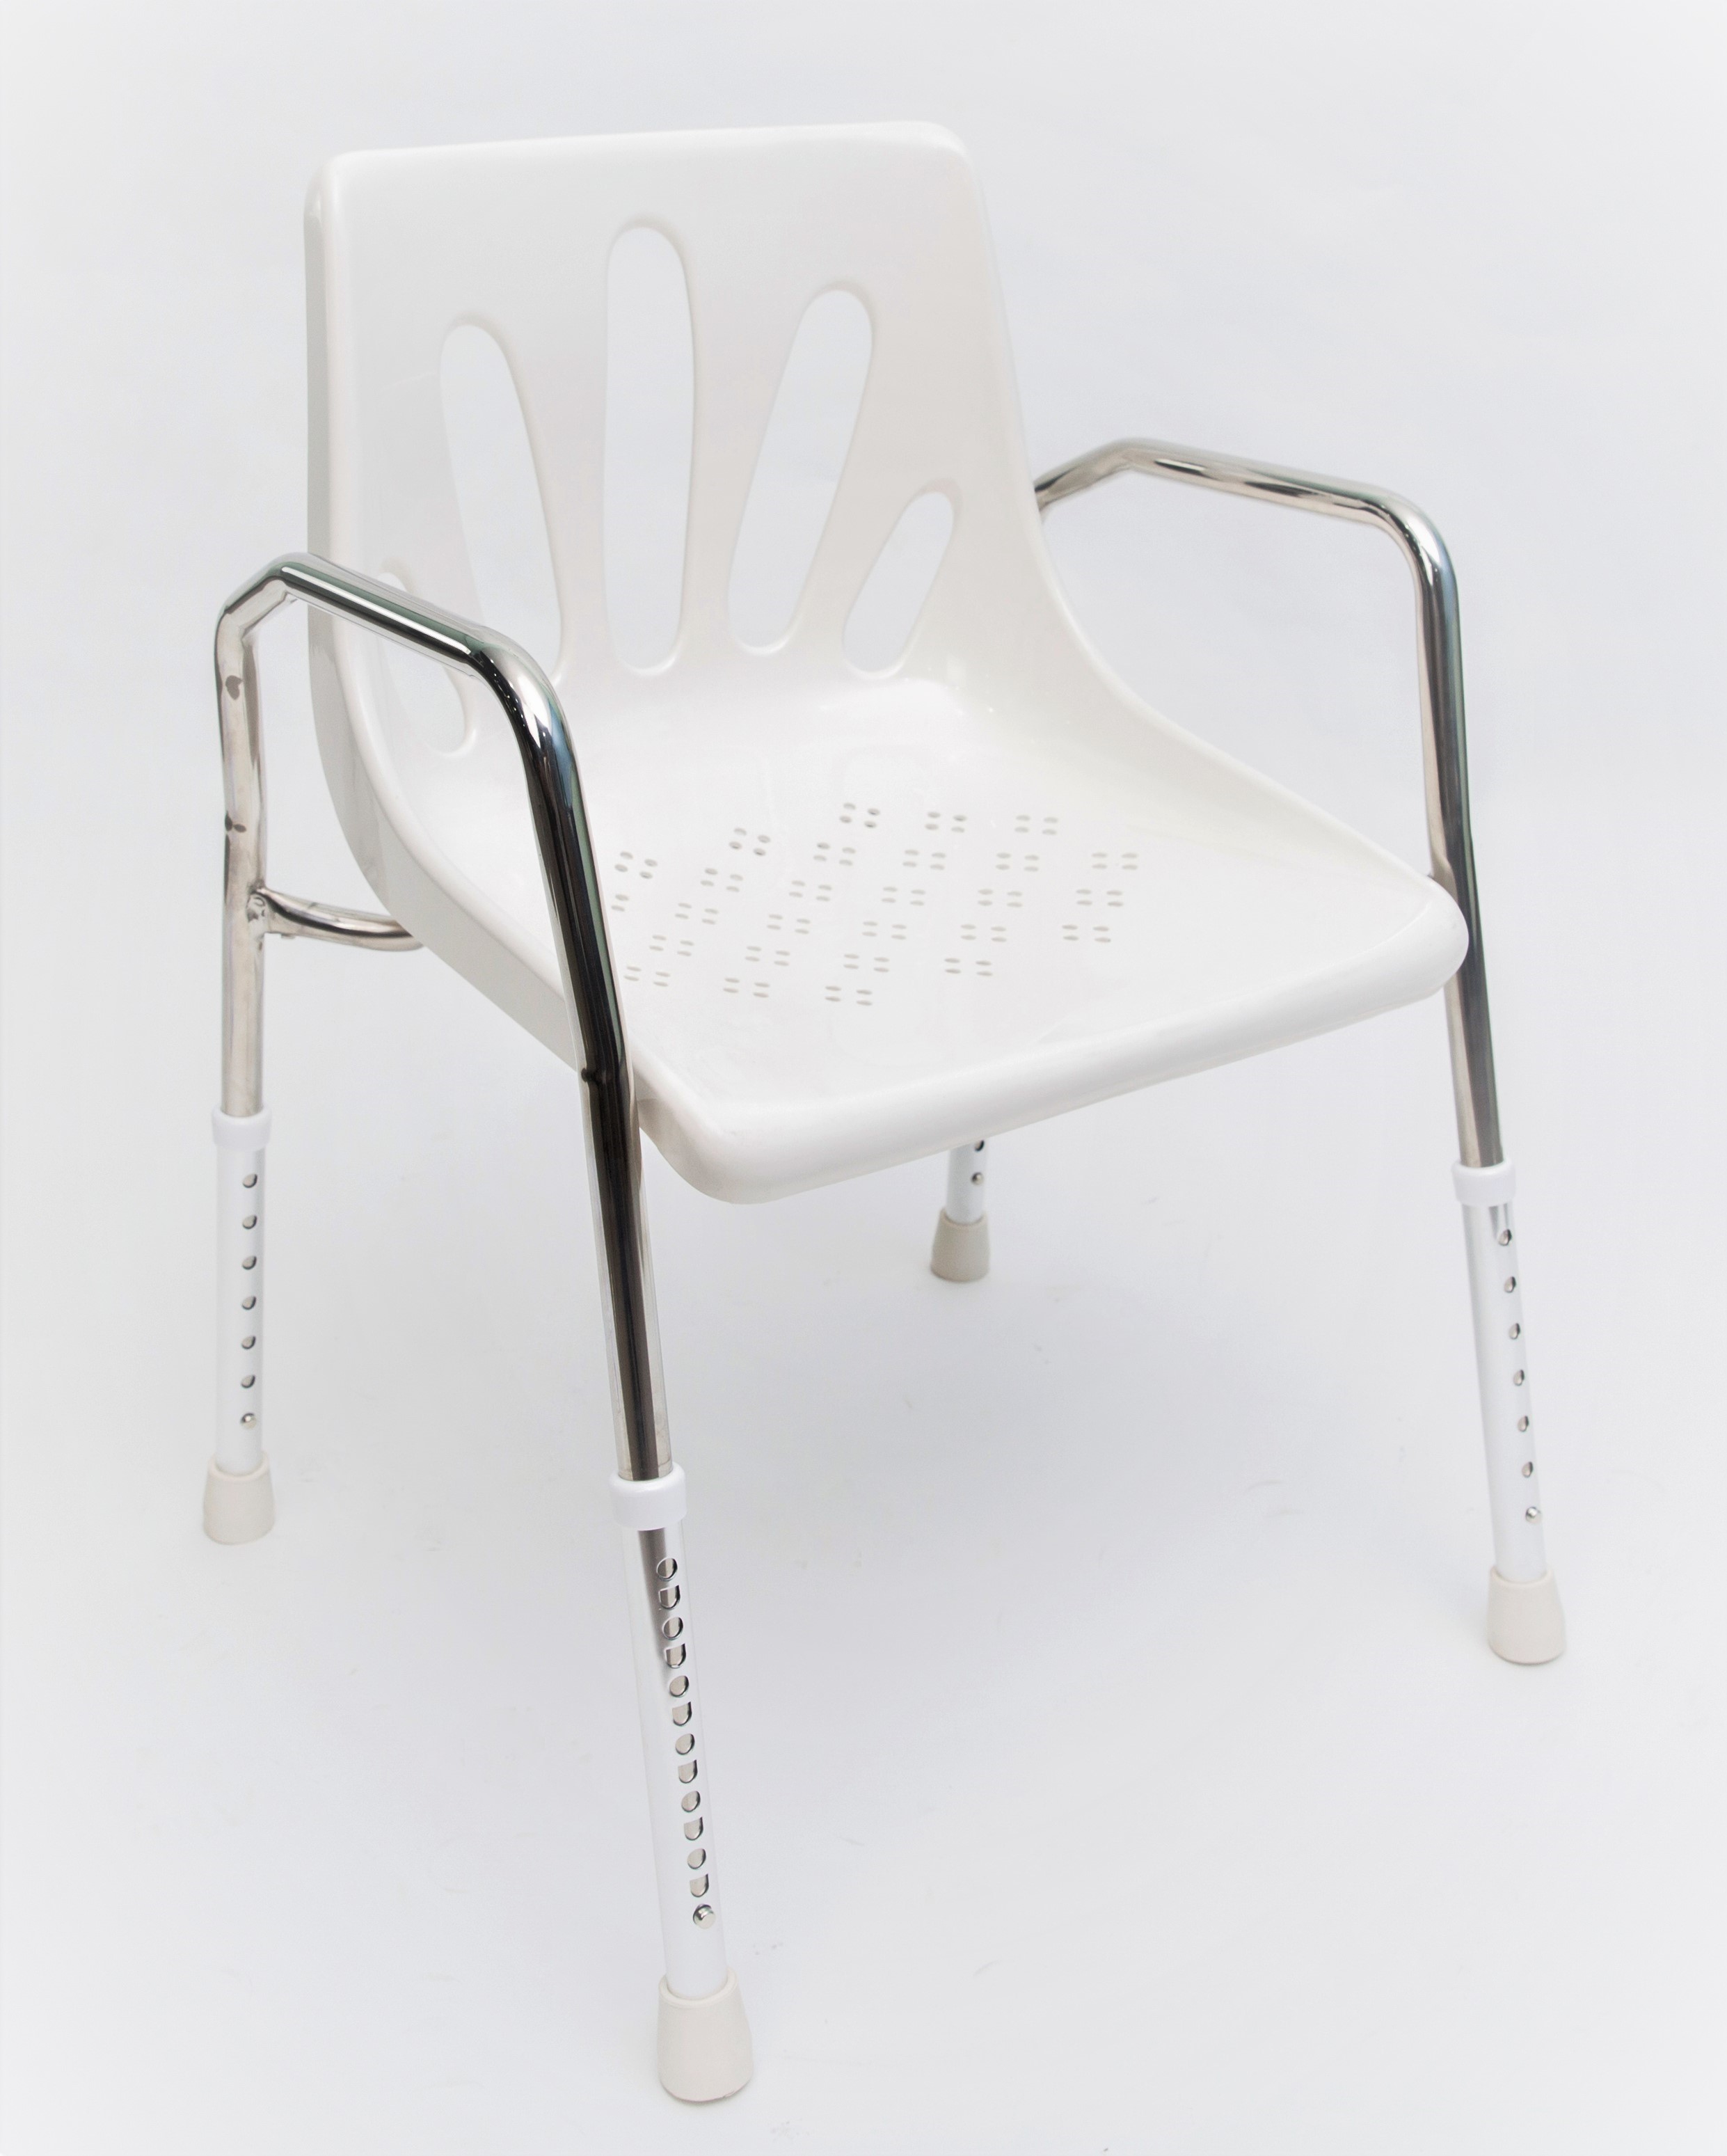 Stainless Shower Chair